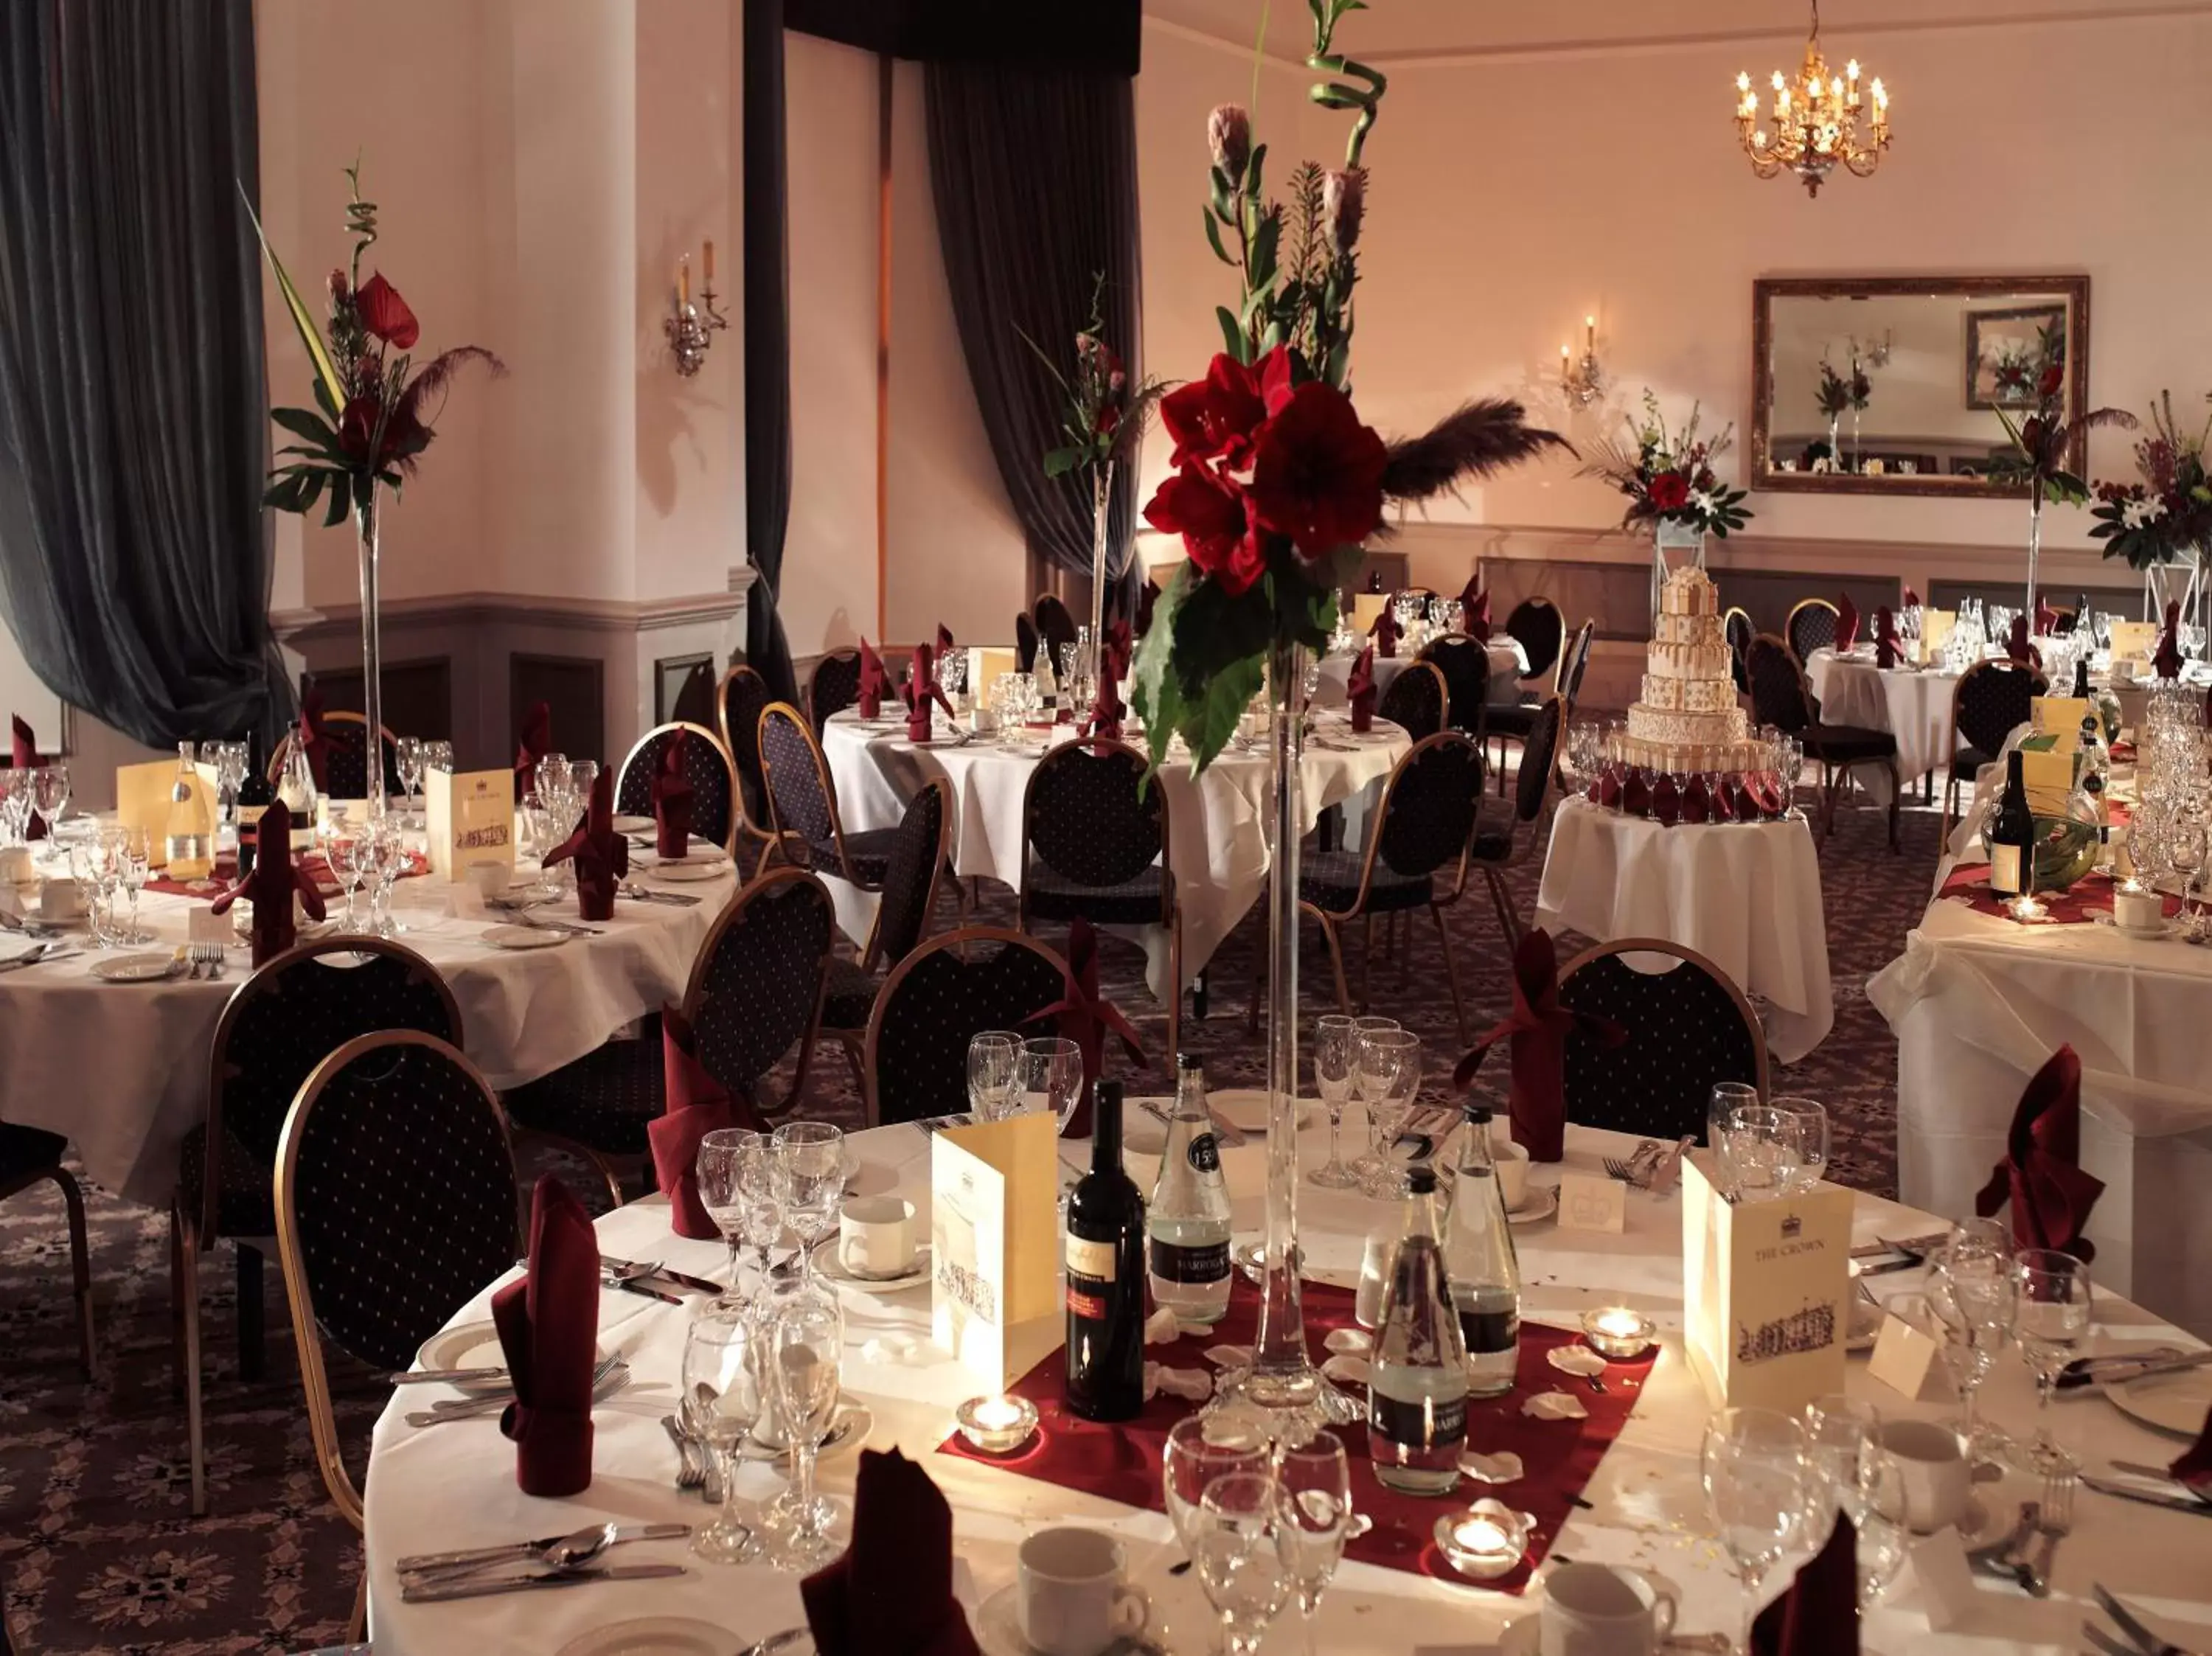 Banquet/Function facilities, Banquet Facilities in The Crown Hotel